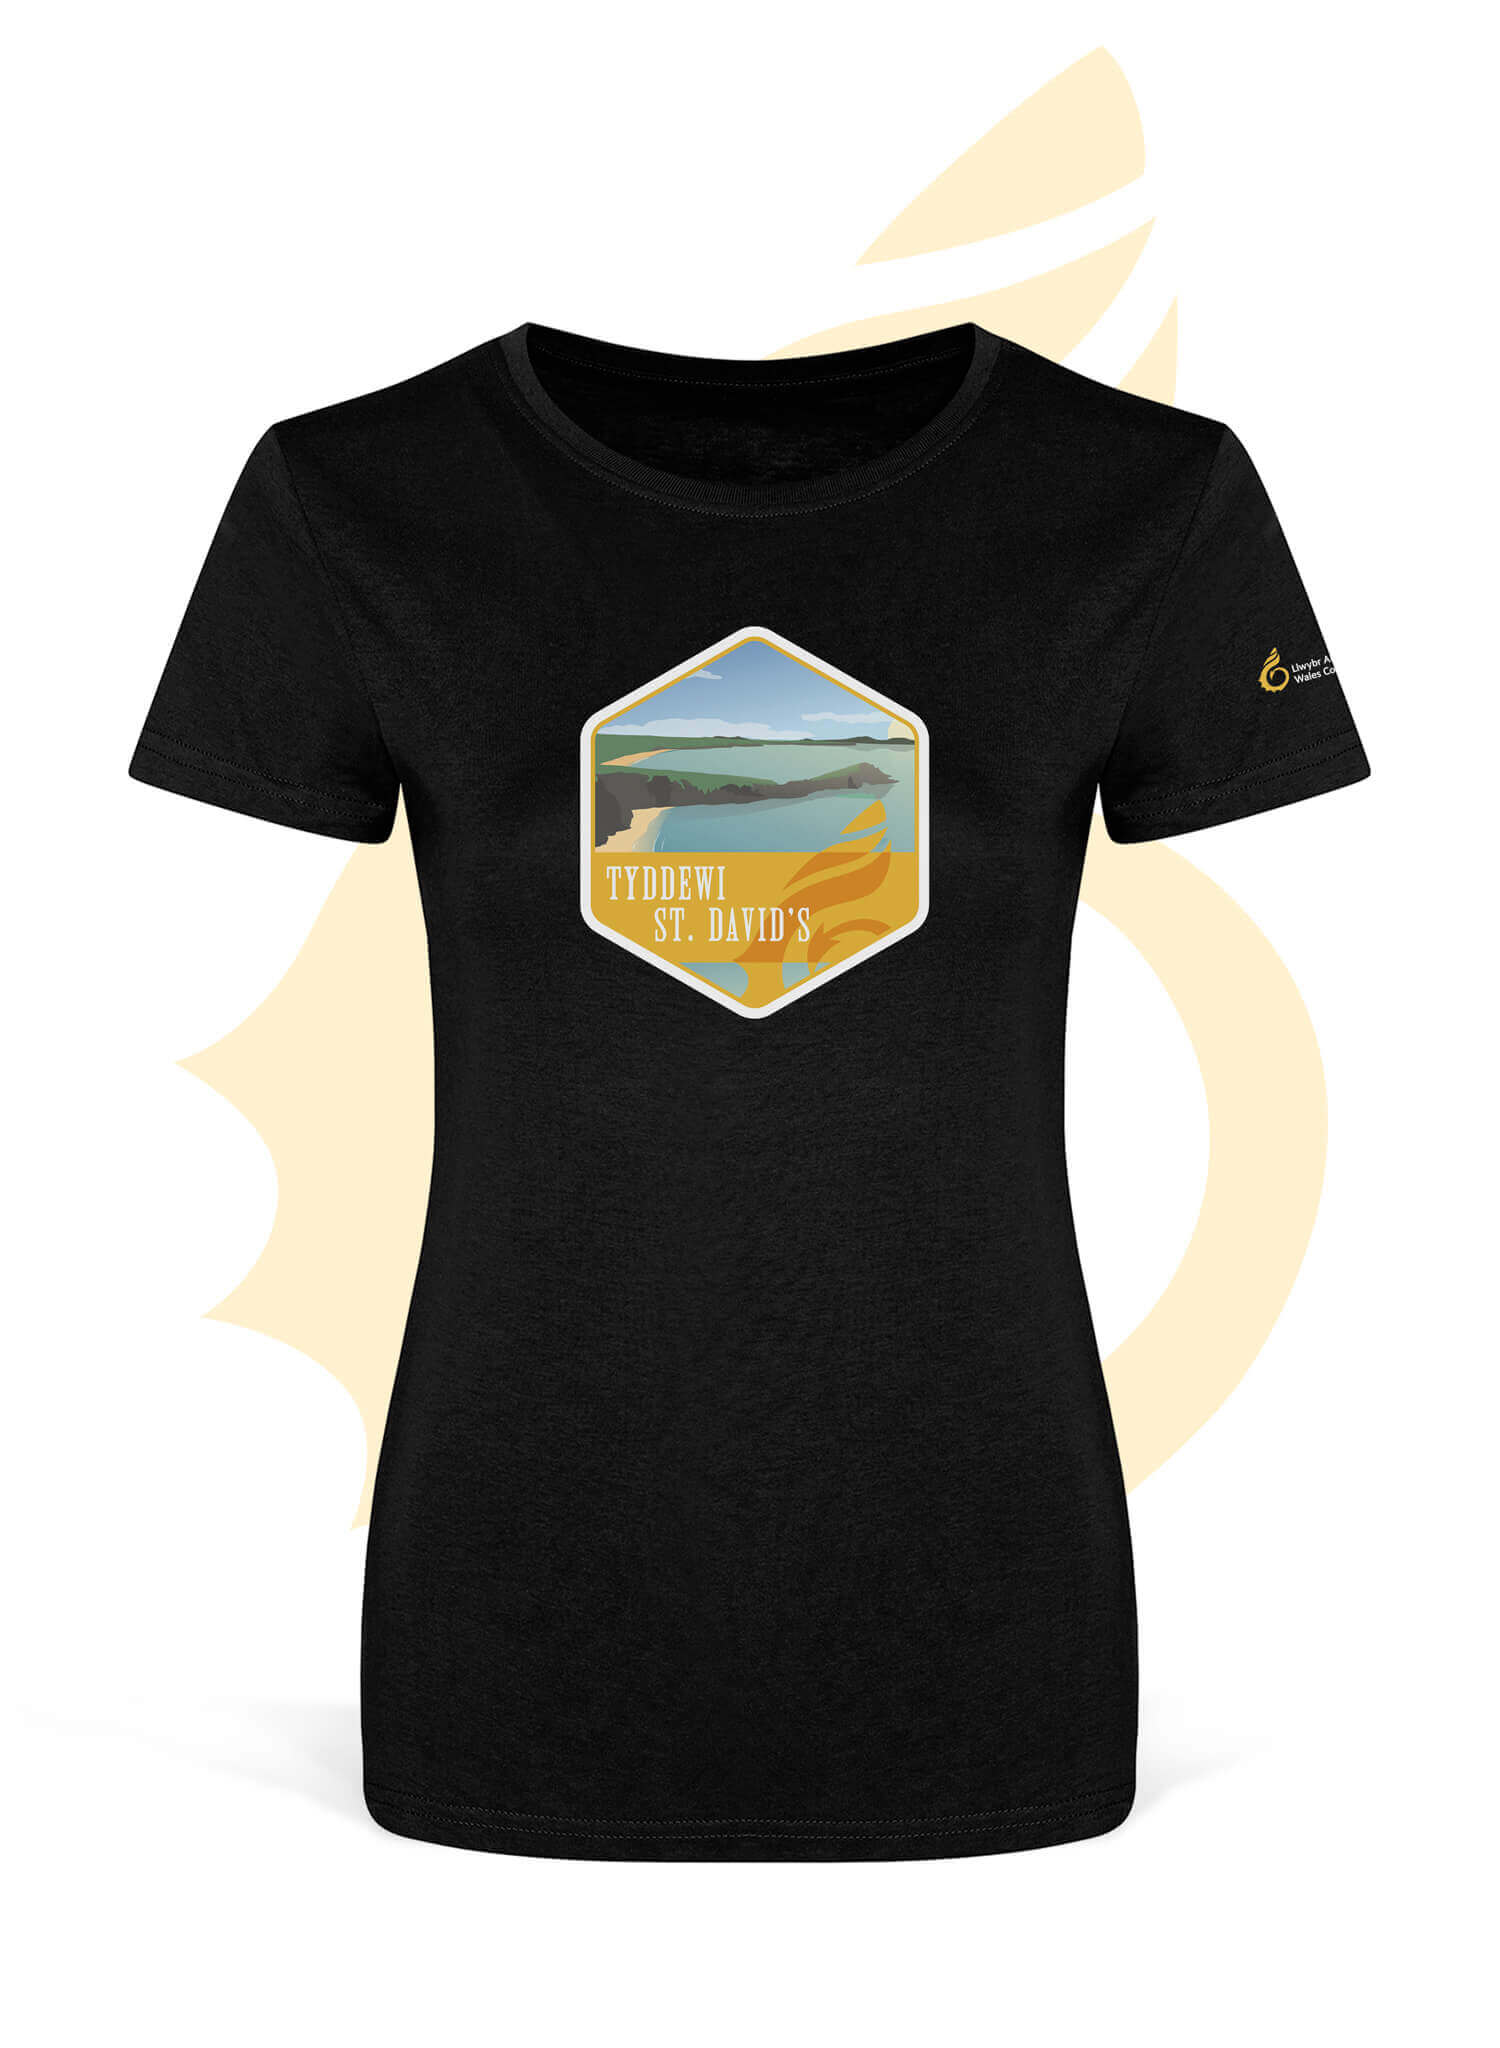 Wales Coast Path black womens organic cotton fitted t-shirt with St. David's design.